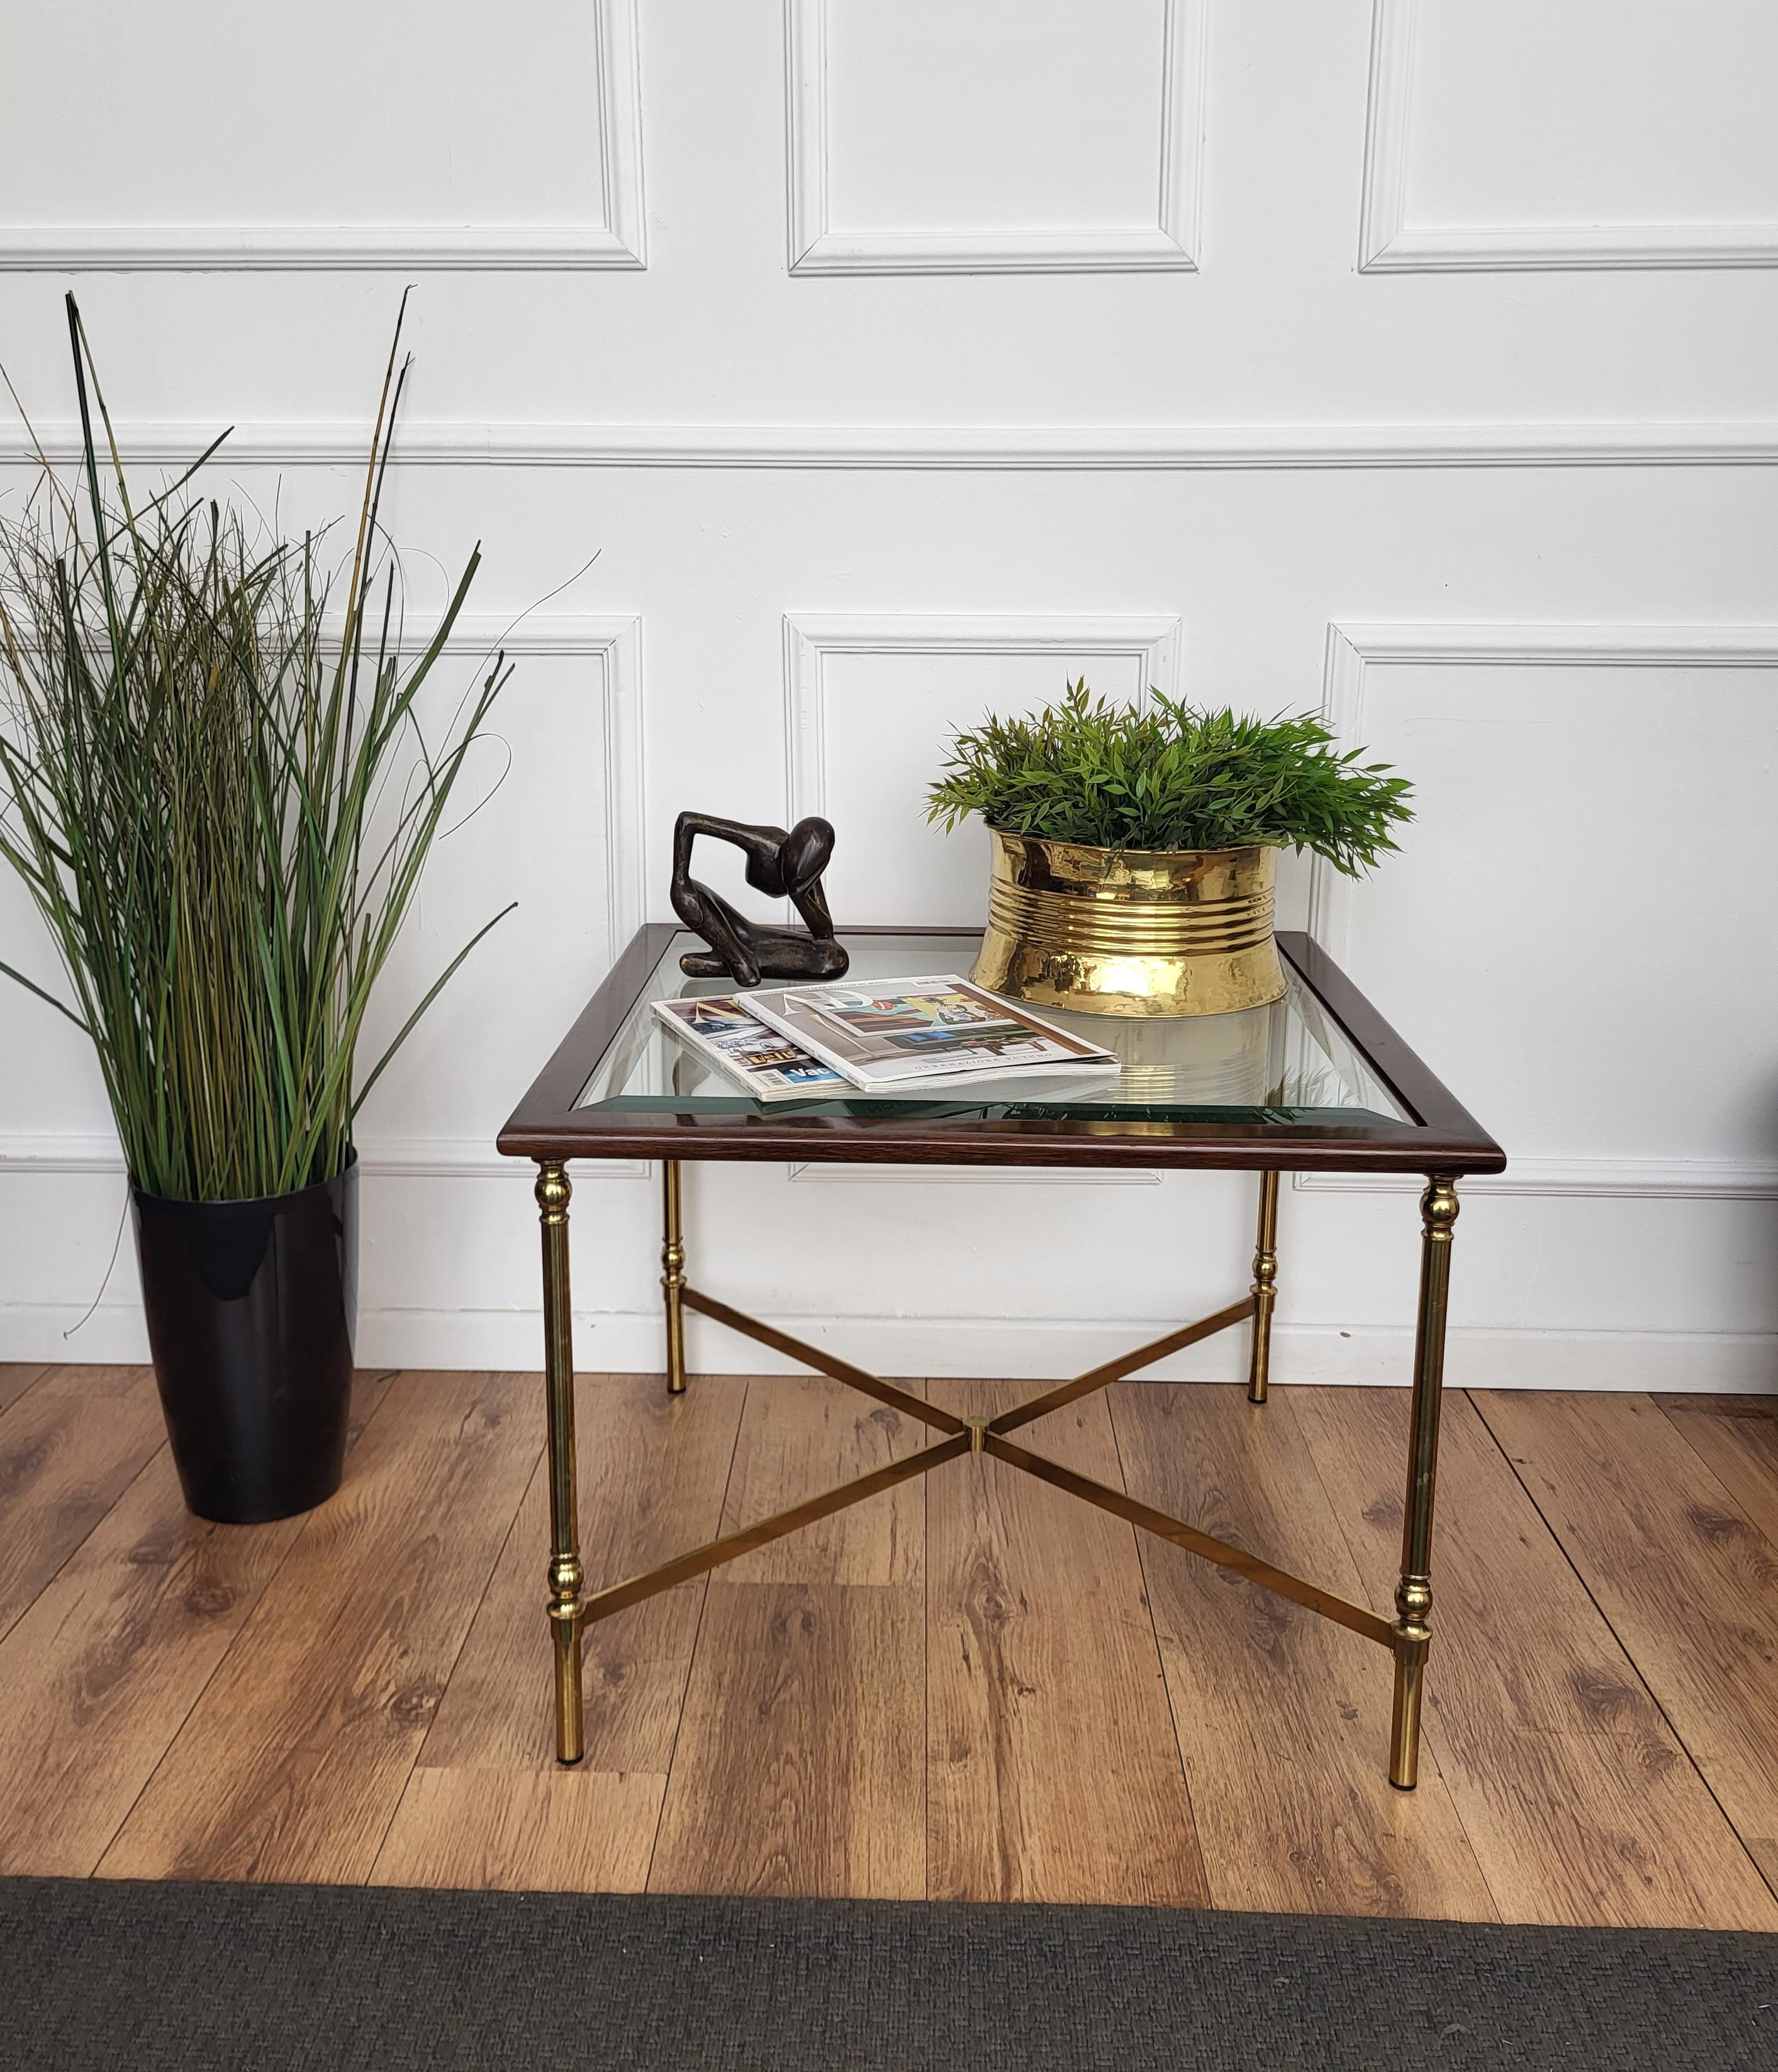 Beautiful and stylish vintage 1980s Italian brass wood and glass side table or coffee table or sofa table. Very good condition with great brass and beveled glass. A great piece that perfectly adds to every home decor the typical glitz, glamour and